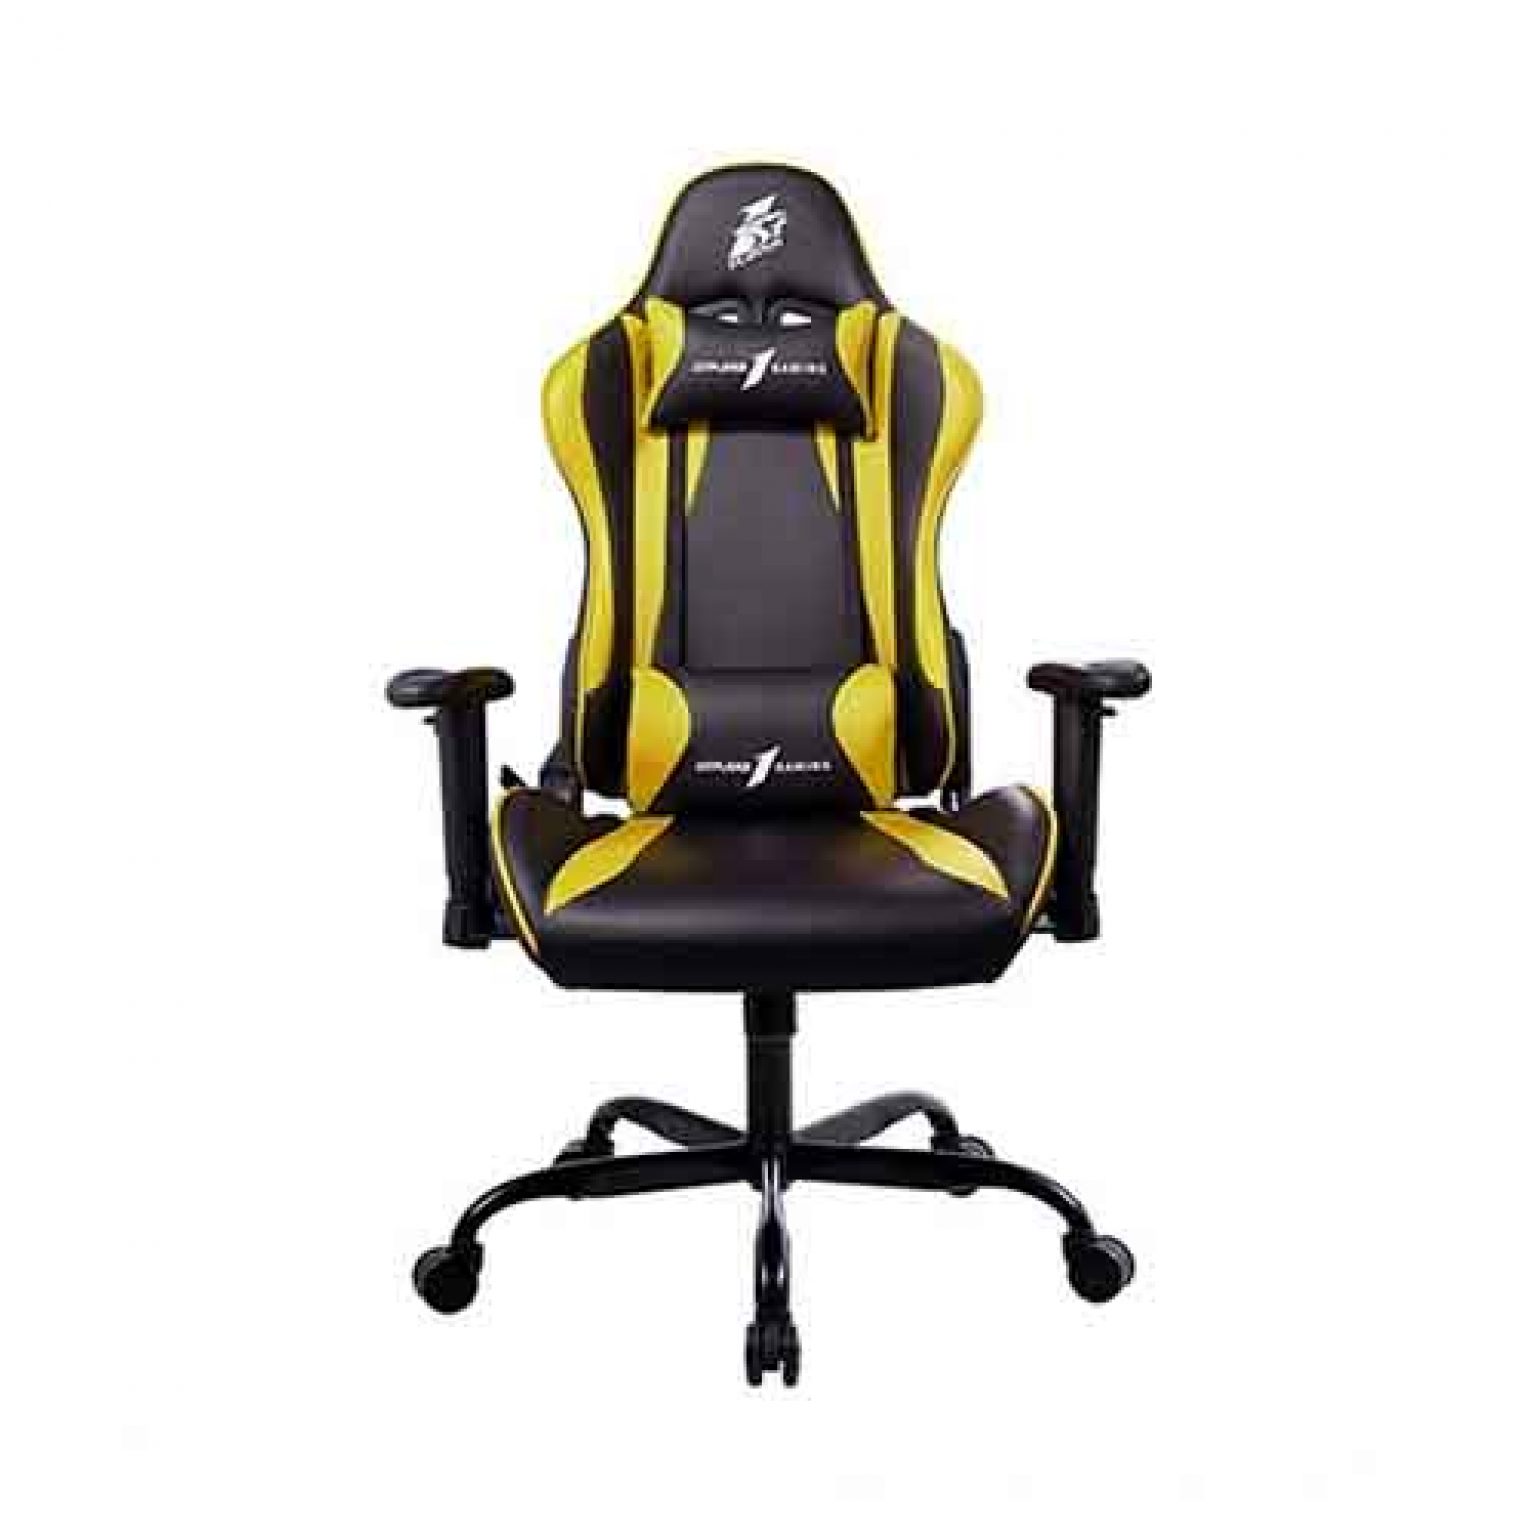 1st Player Gaming Chair Black/Yellow (S01) Price in Pakistan - Compare ...